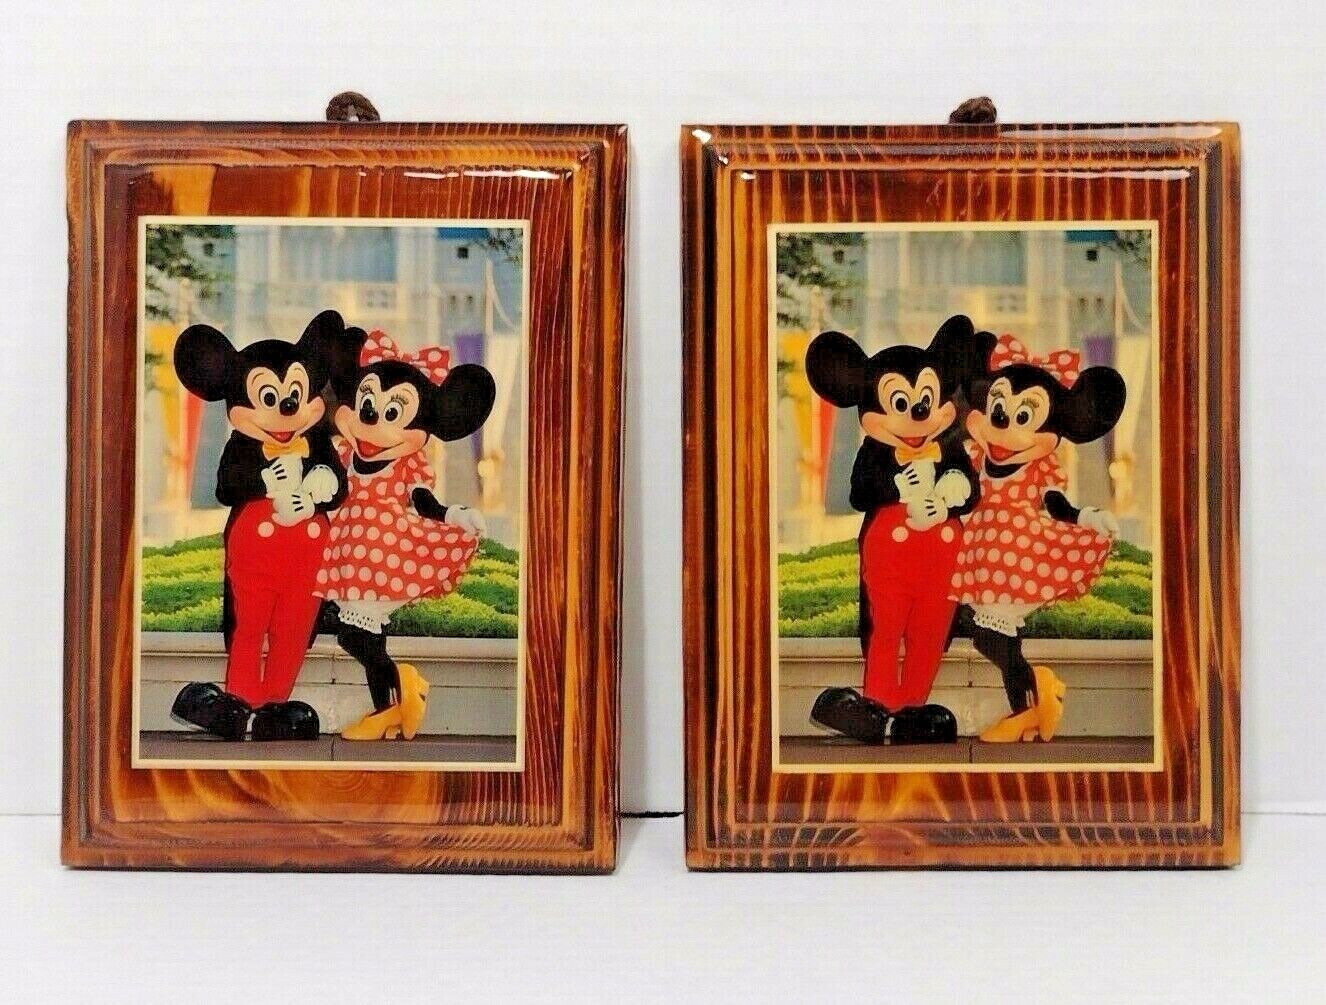 Lot of 2 Vintage Disney Mickey Minnie Wooden Pictures Laminate Hanging Photos